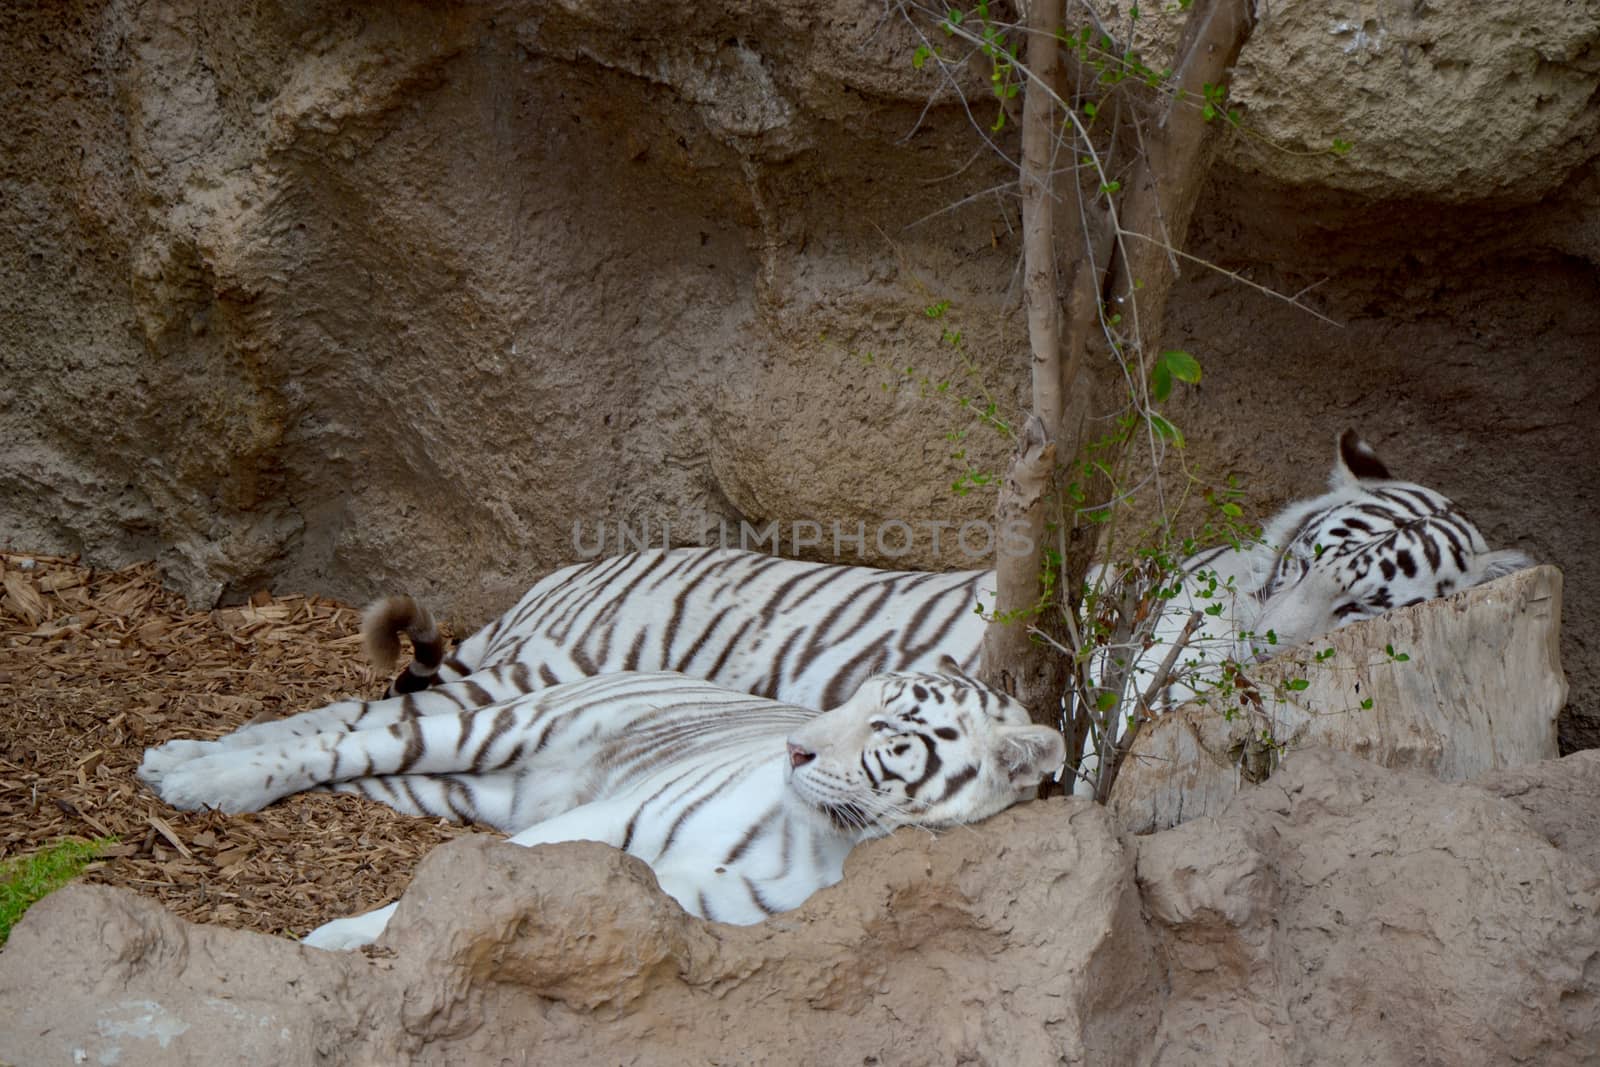 White tigers by ruv86